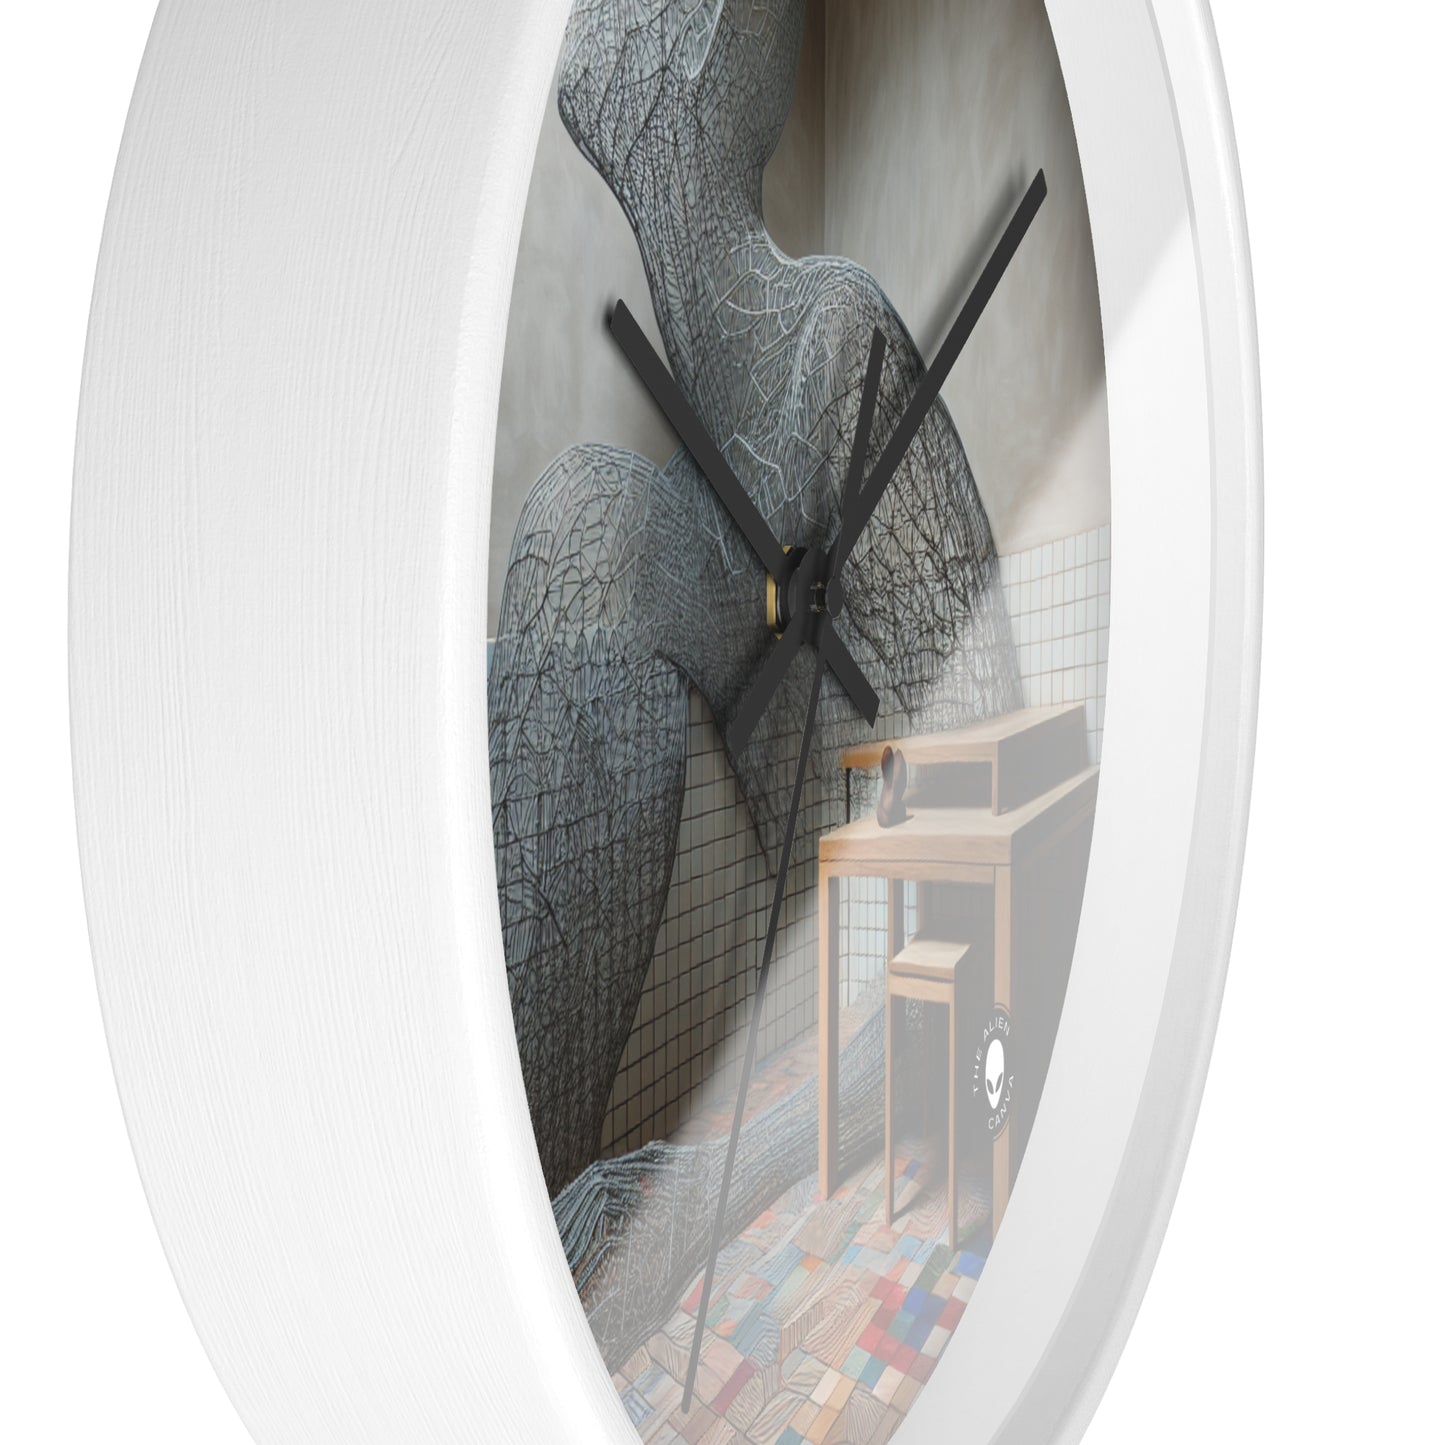 "Harmony Reimagined: Nature, Technology, and the Modern World" - The Alien Wall Clock Installation Sculpture